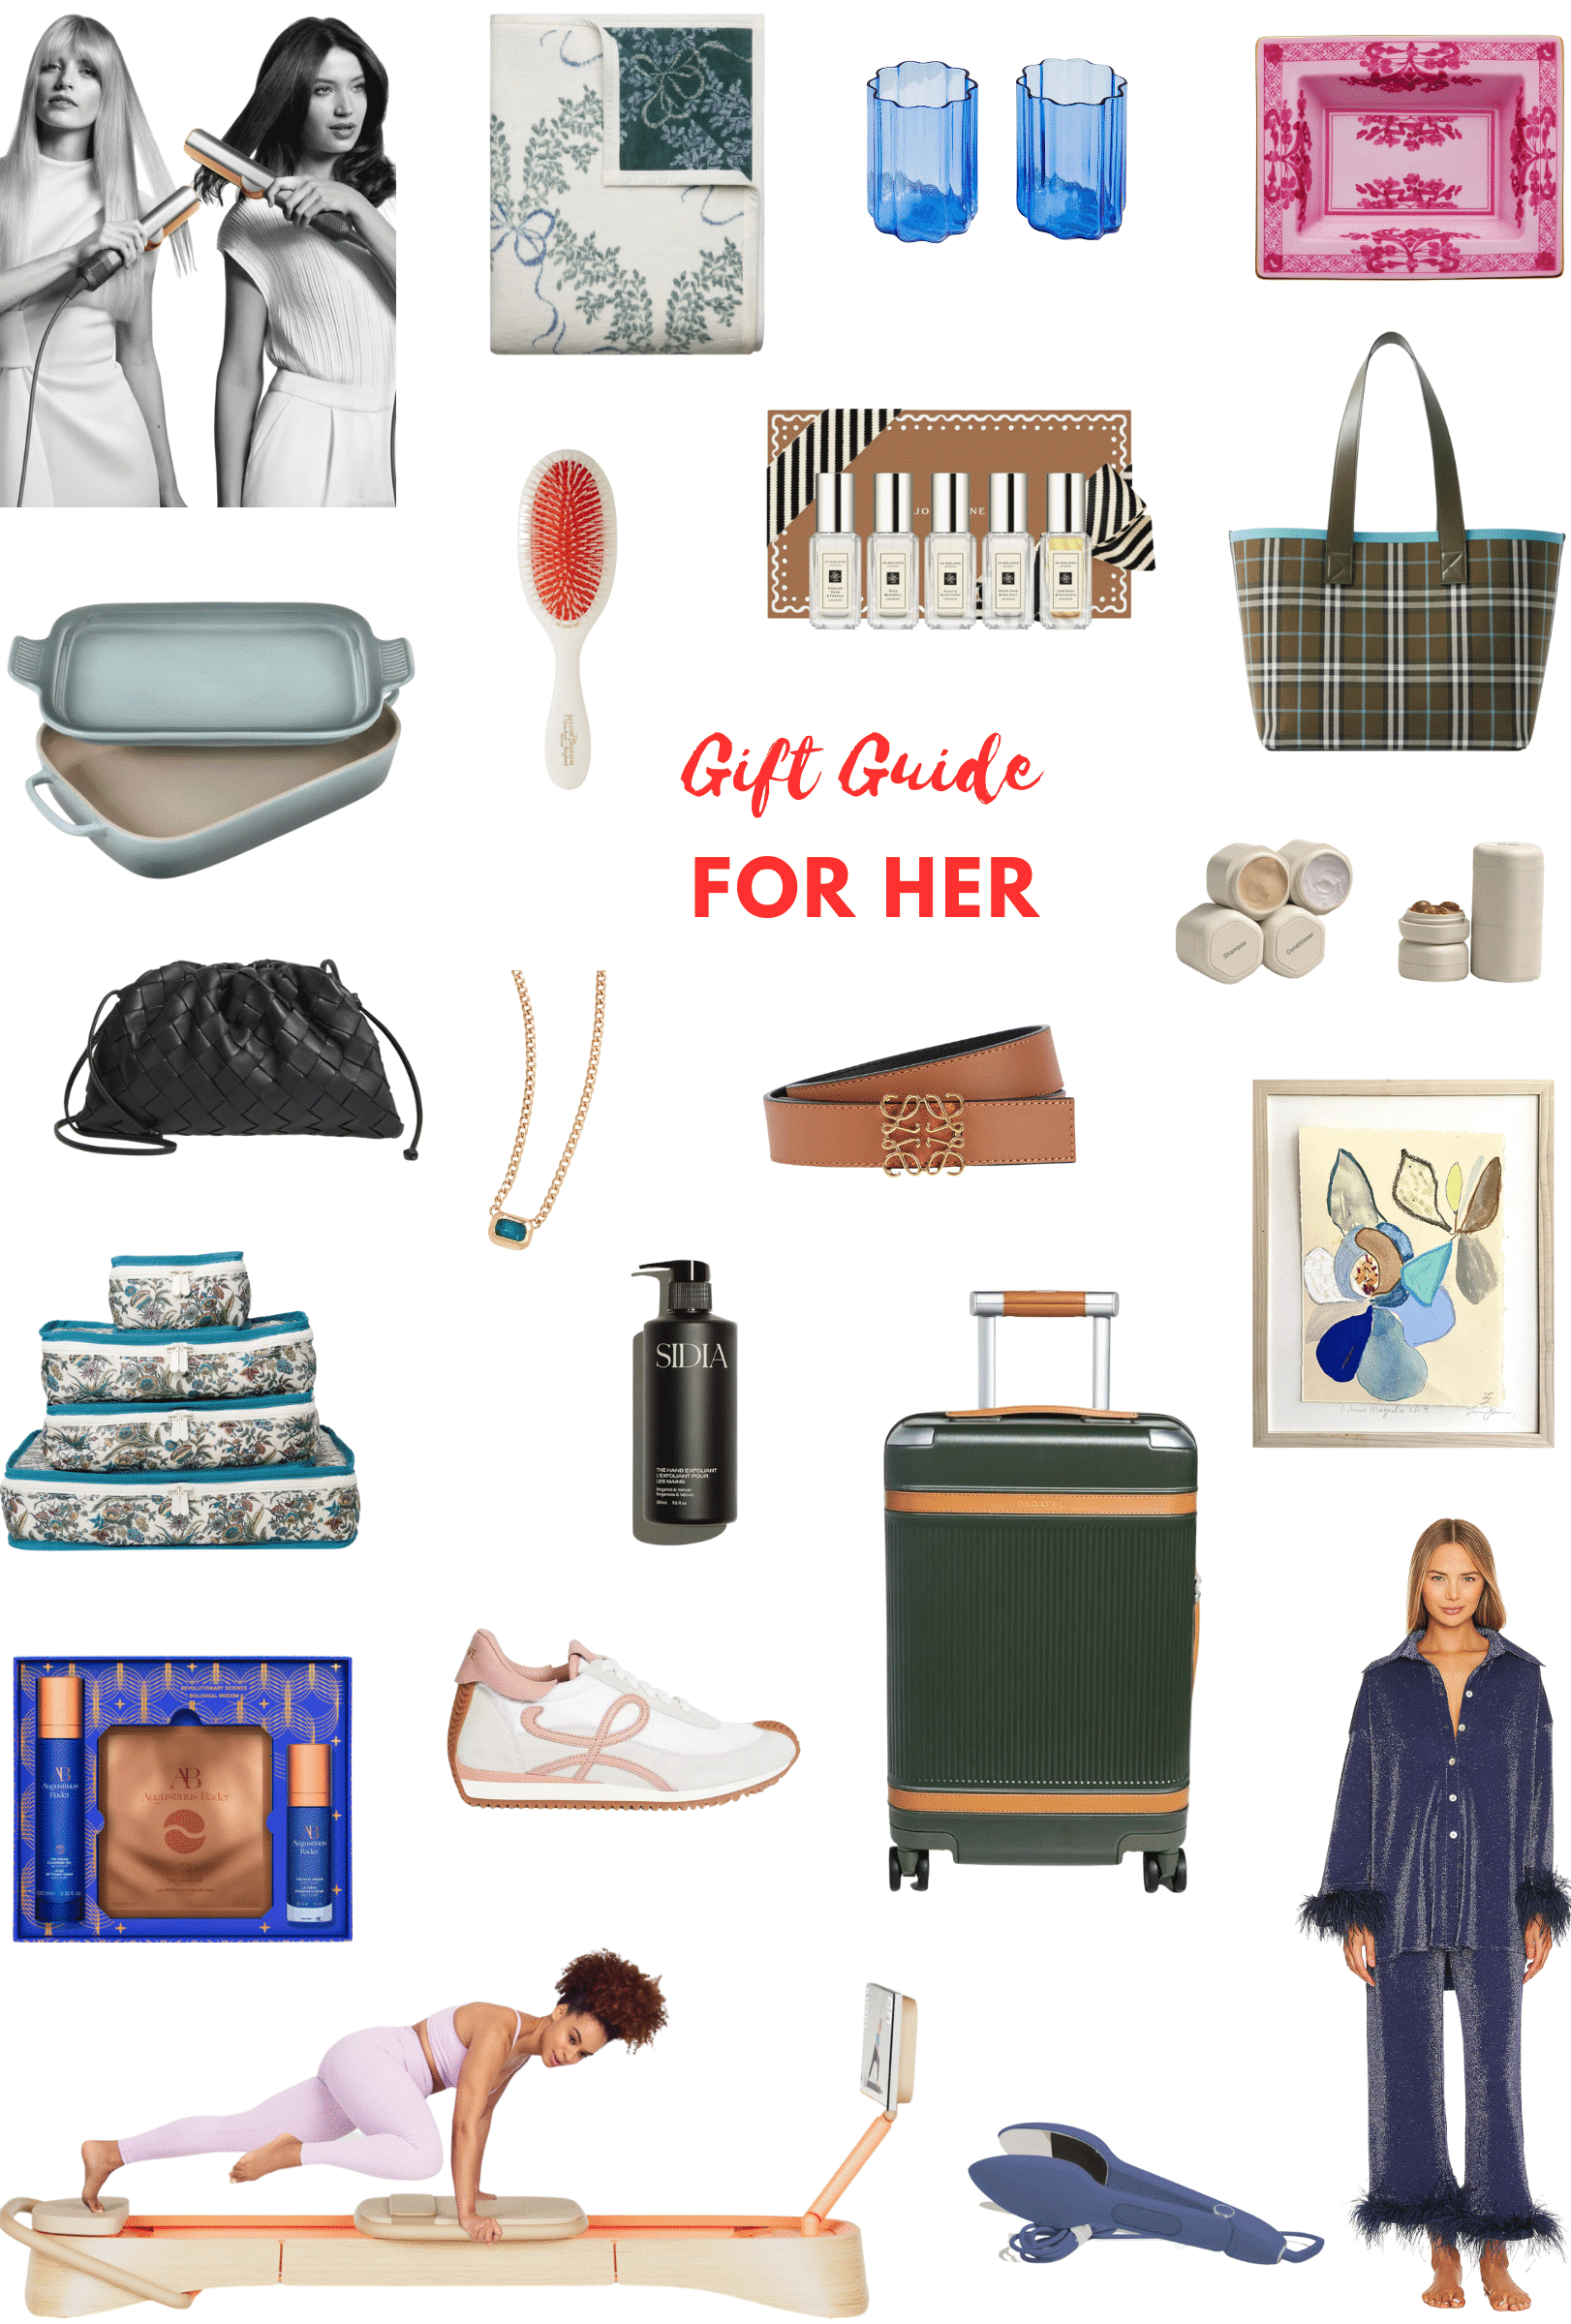 Holiday Gifts She Really Wants! (Gift Guide for Women)